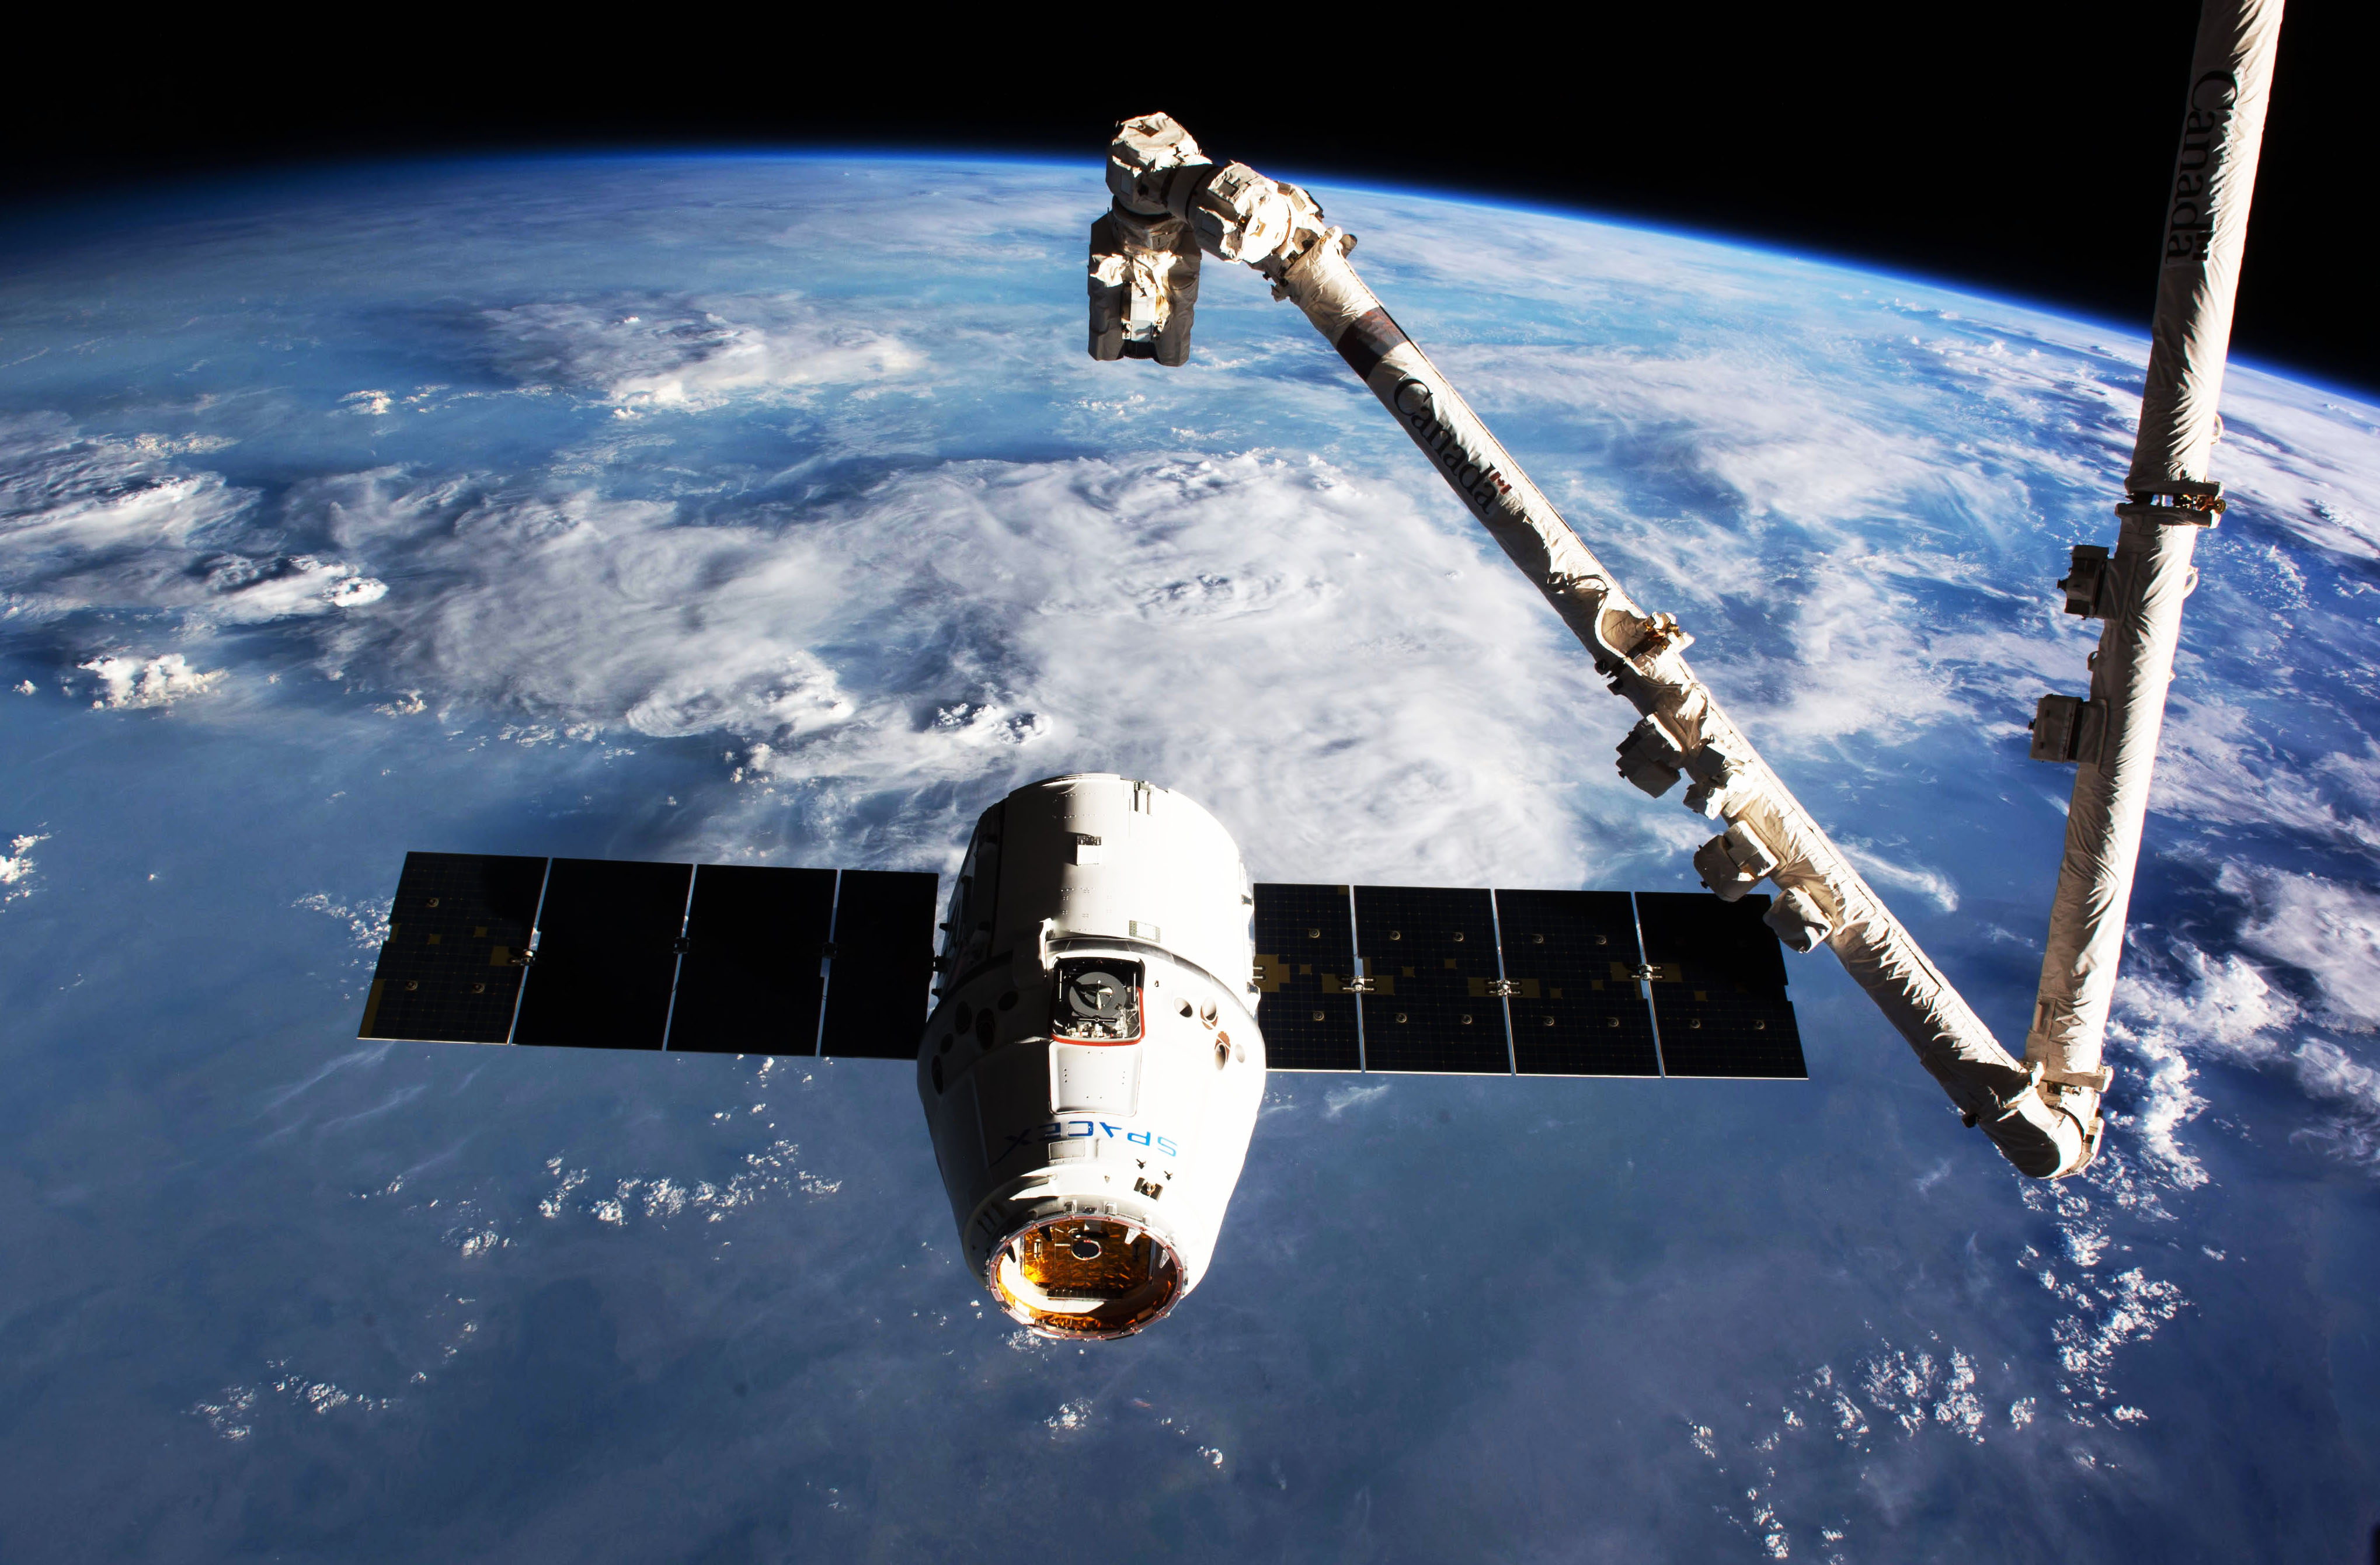 Dragon Set to Deliver Supplies to International Space Station ...